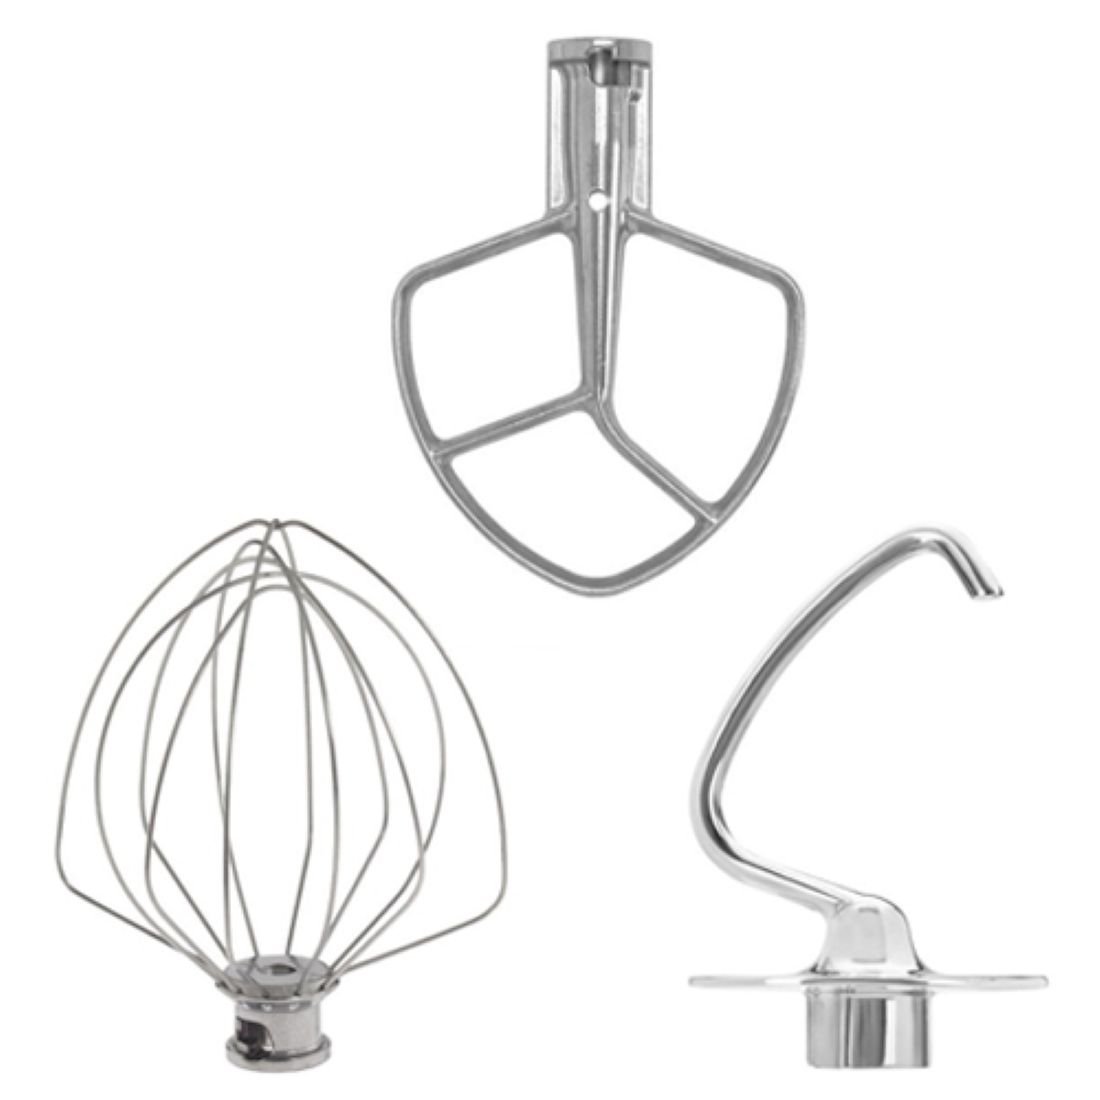 KitchenAid Stand Mixer Stainless Steel Mixing Attachments, Set of 3 +  Reviews